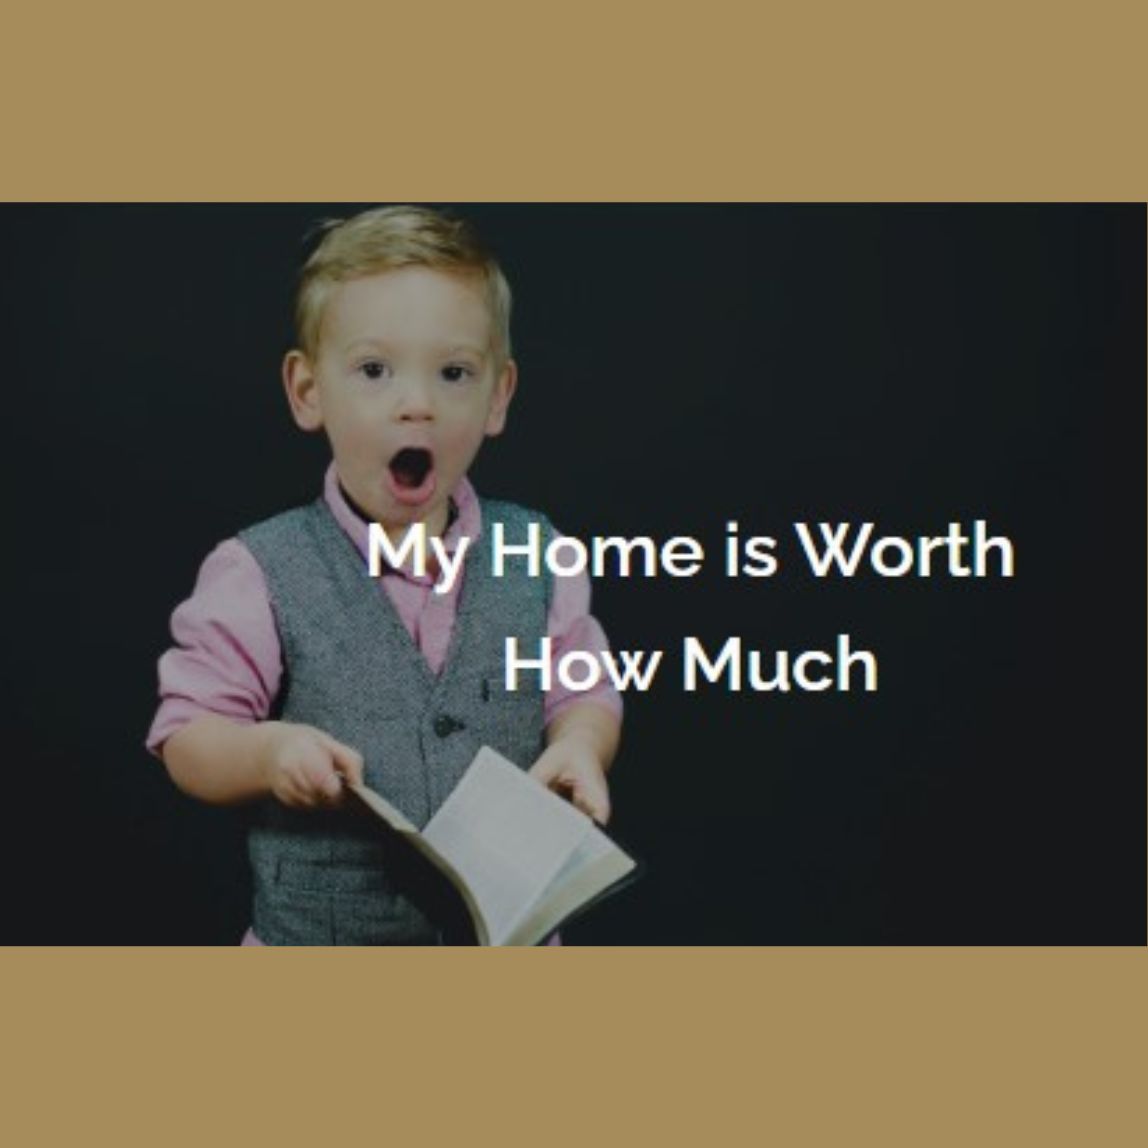 home value image